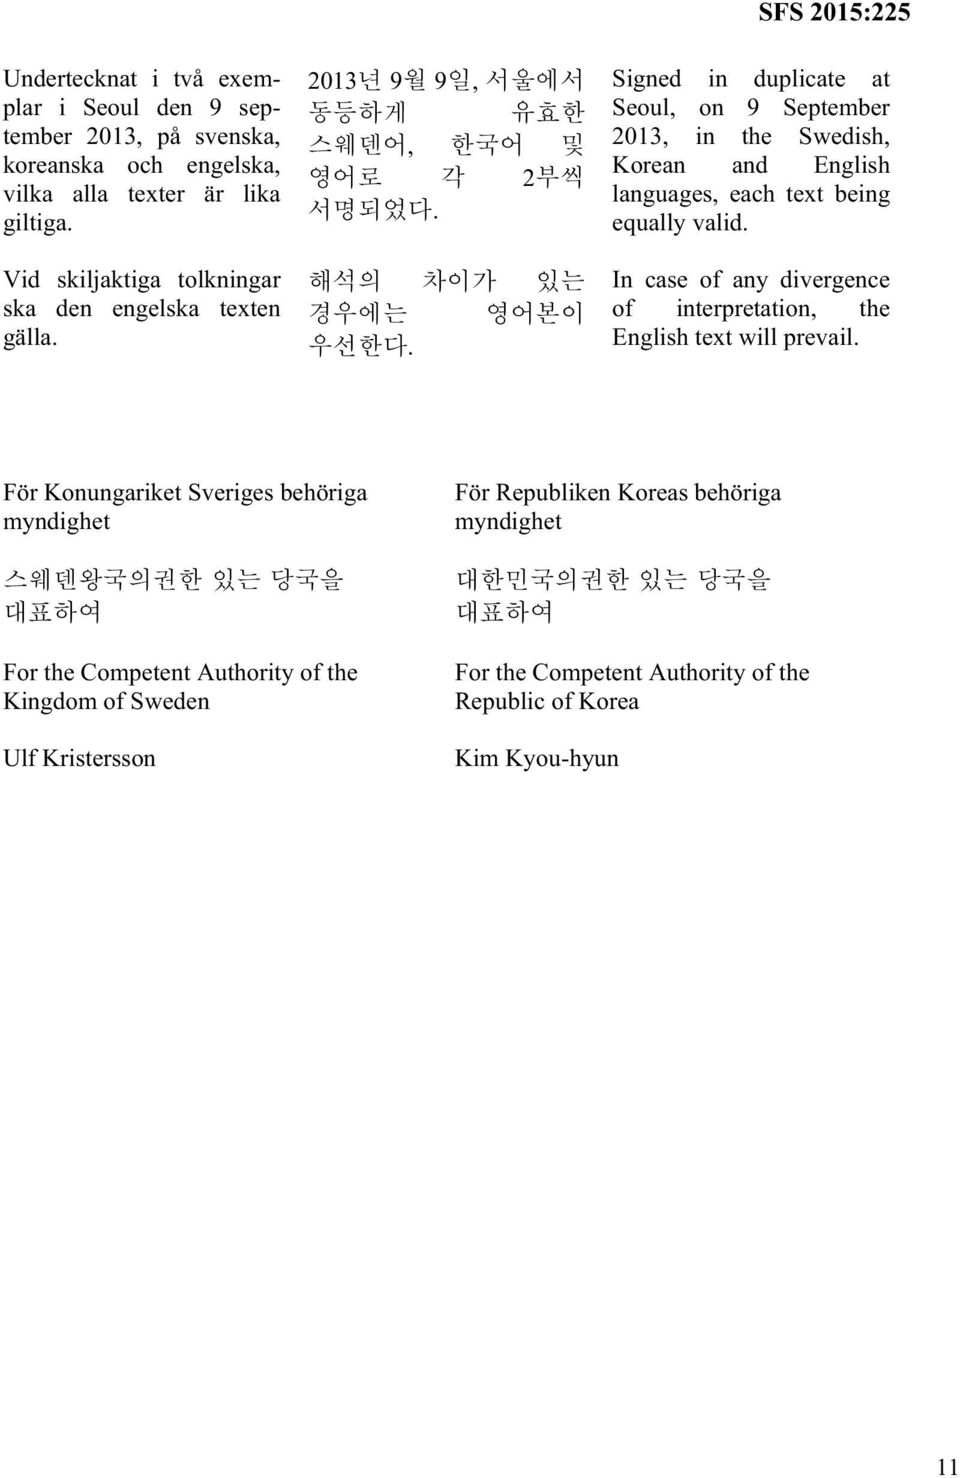 . SFS 2015:225 Signed in duplicate at Seoul, on 9 September 2013, in the Swedish, Korean and English languages, each text being equally valid.